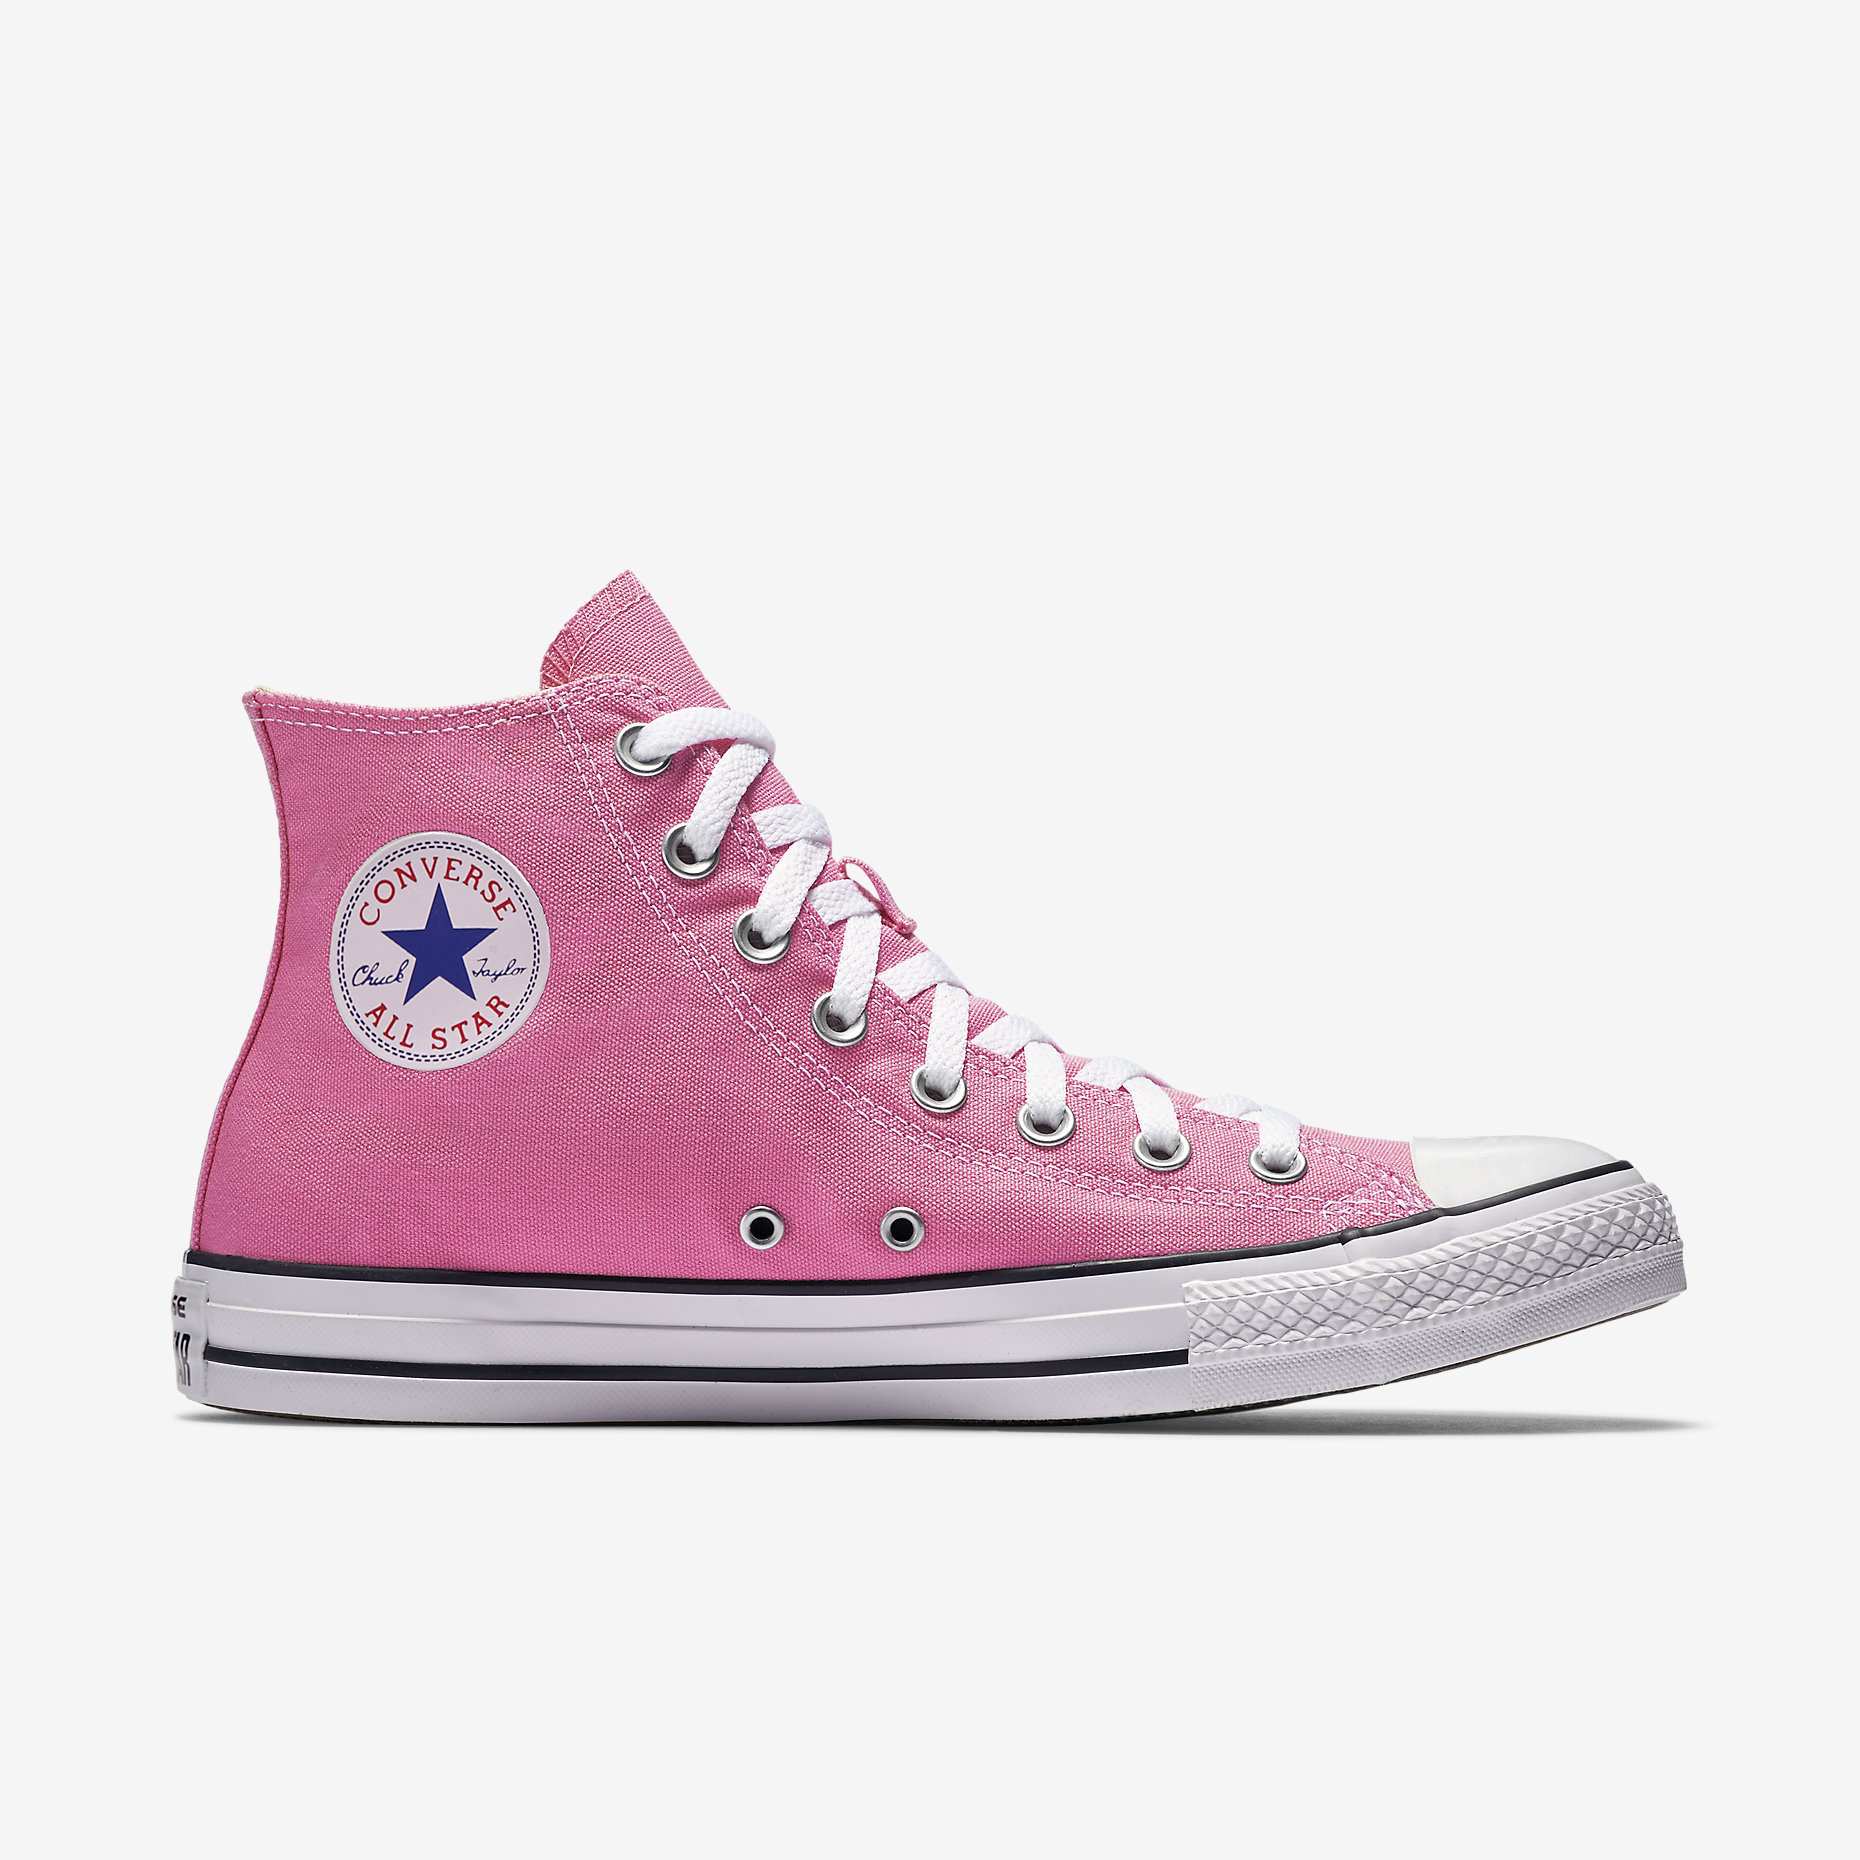 pink high top converse youth